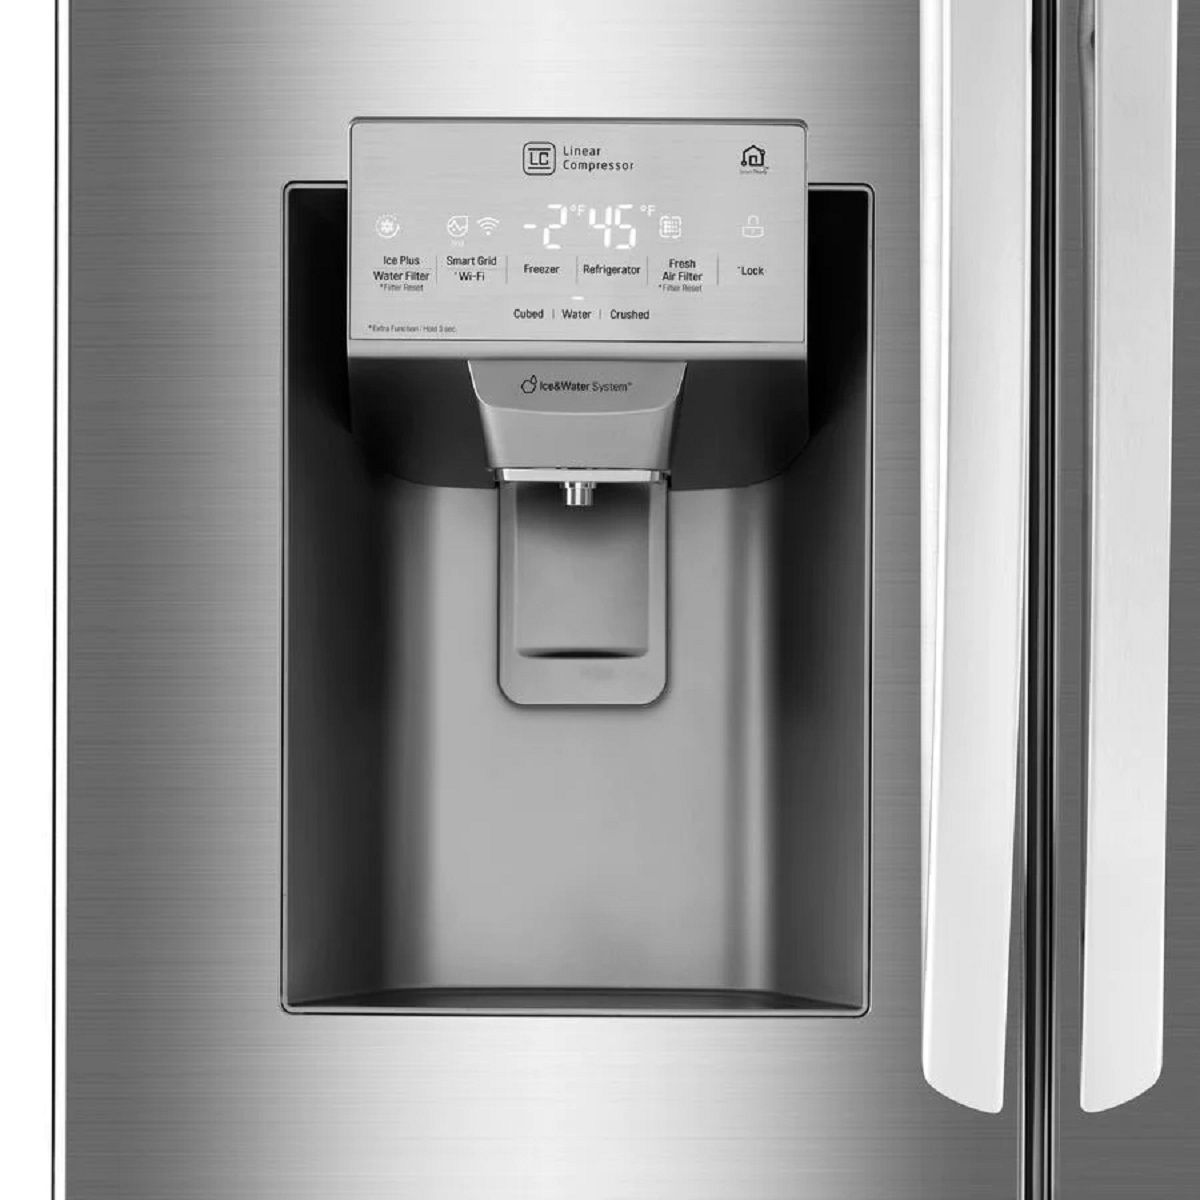 How To Fix The Error Code F DS For LG Refrigerator